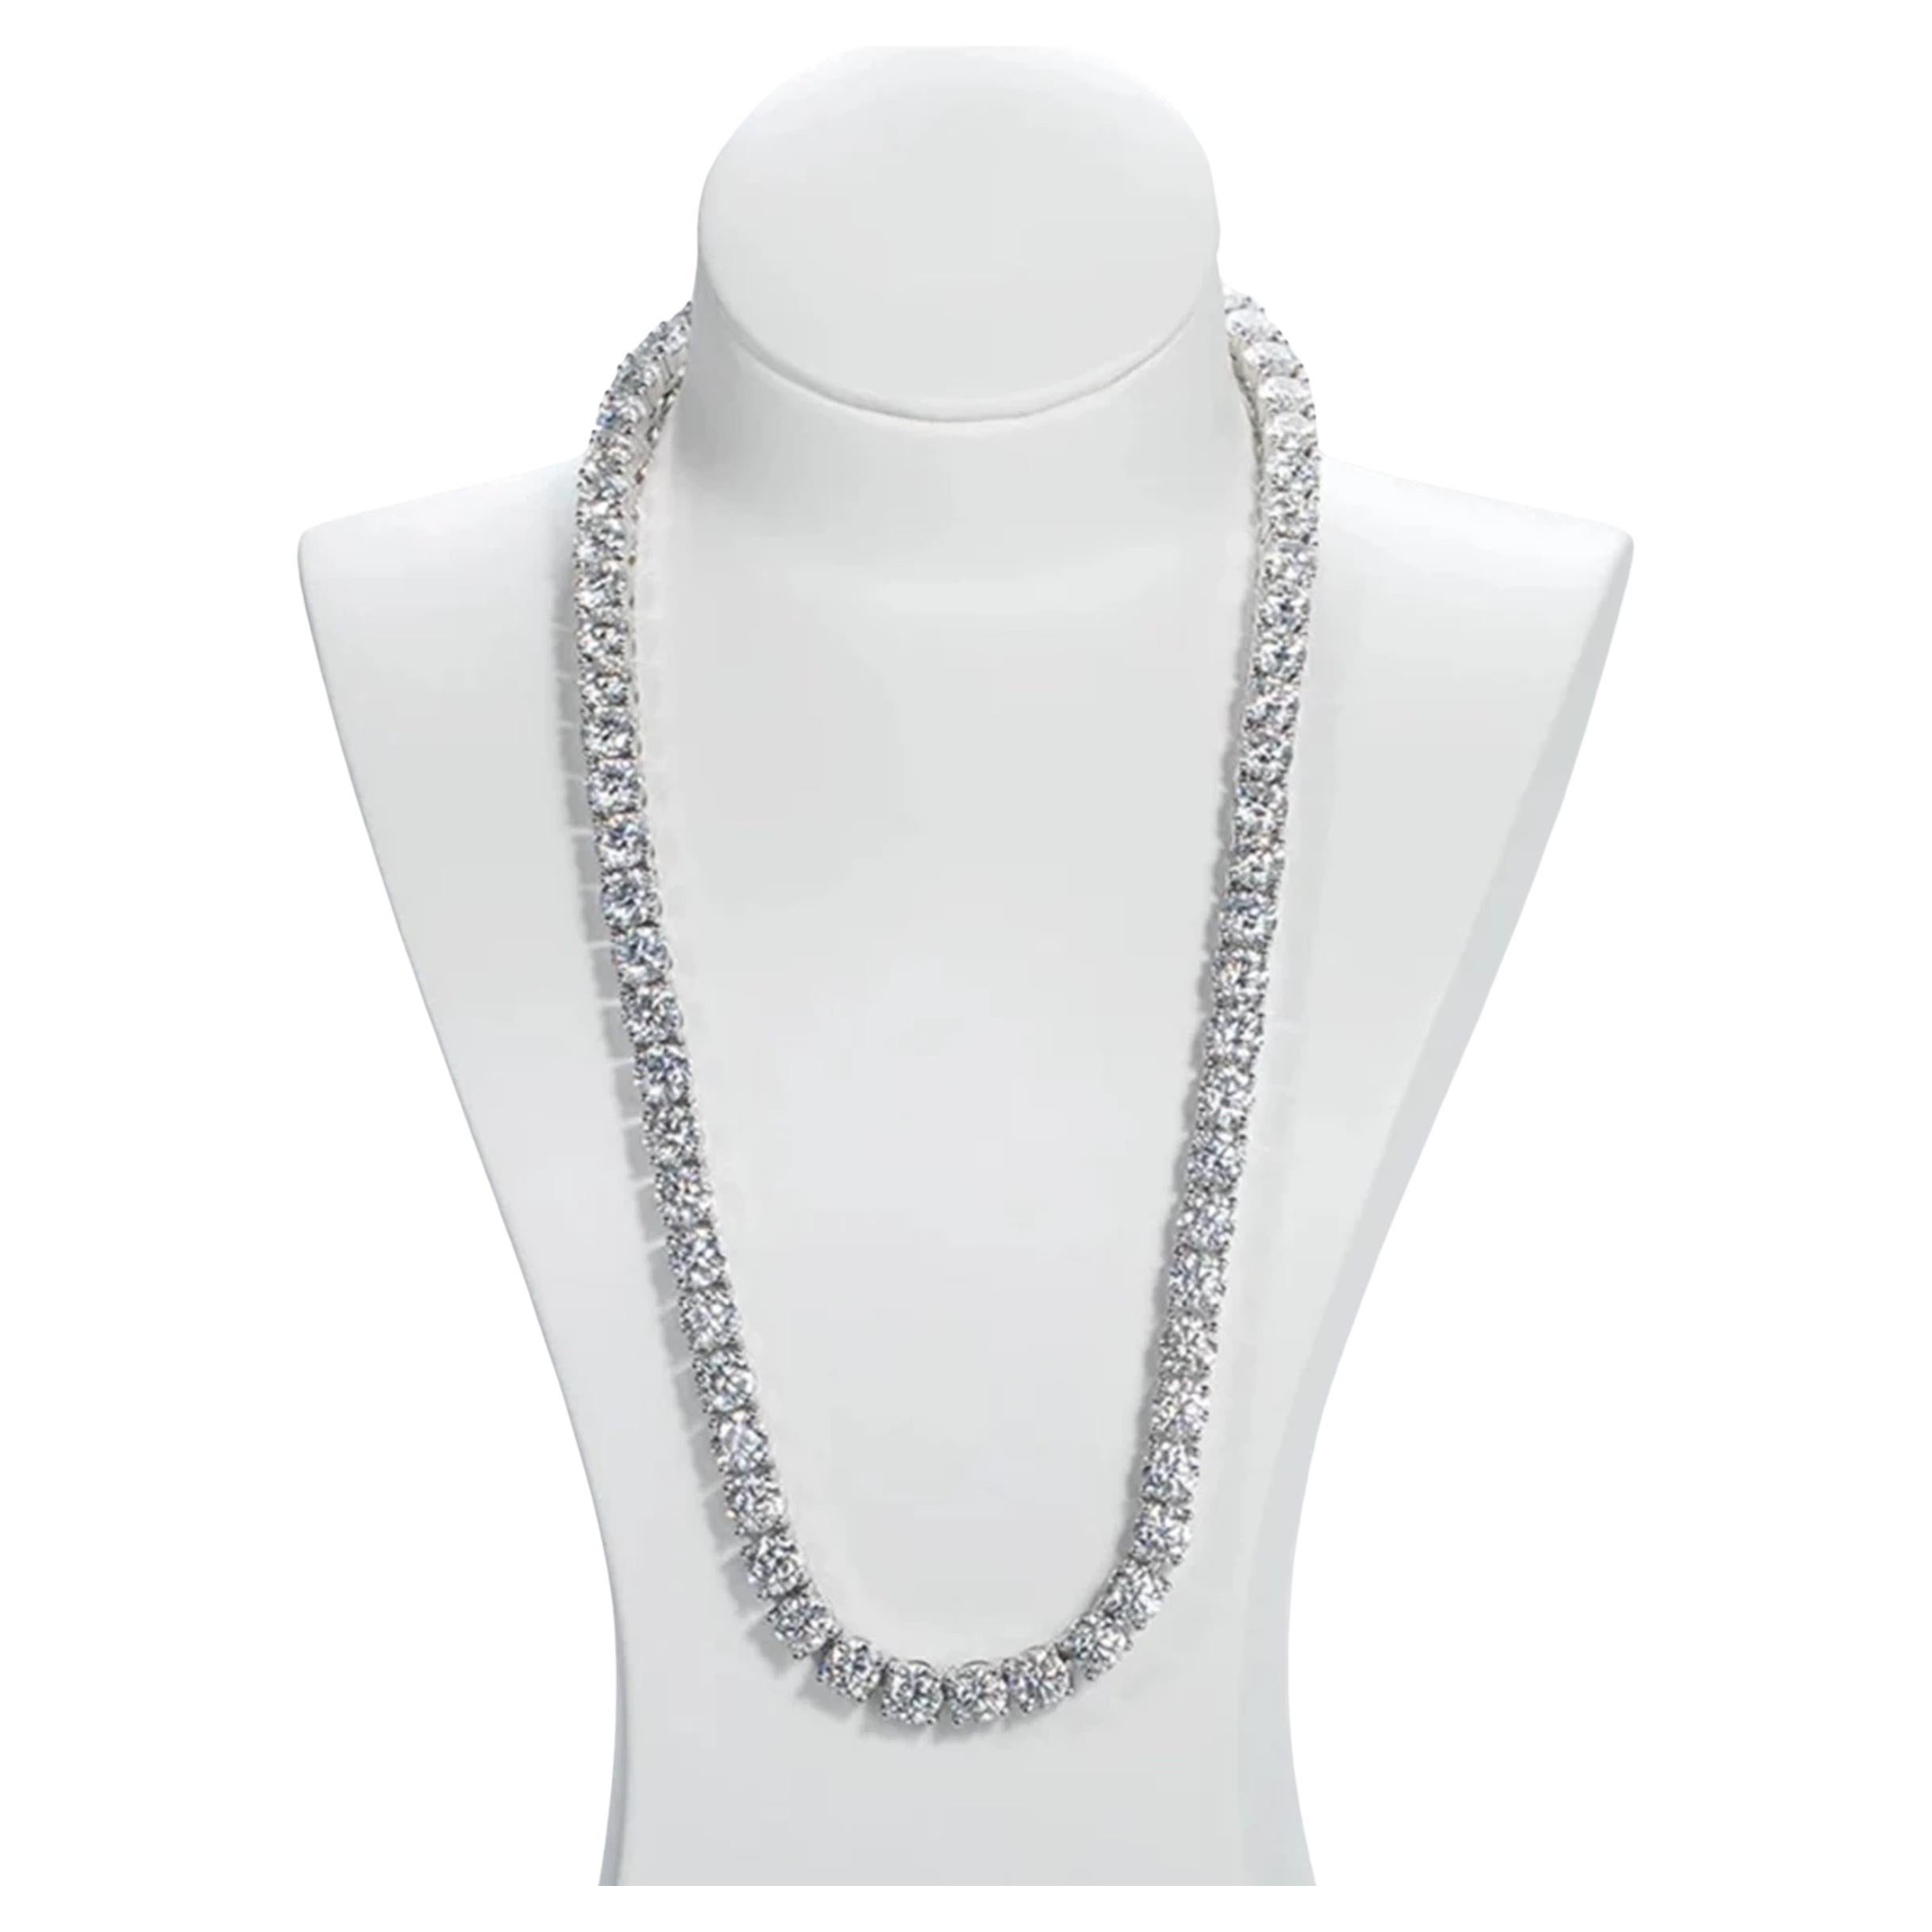 This gorgeous necklace 
Experience the epitome of luxury with our stunning 53 carats Diamonds Riviera Necklace crafted meticulously in 14K White Gold, boasting a weight of 32.55 grams. This exquisite piece is a true testament to timeless elegance